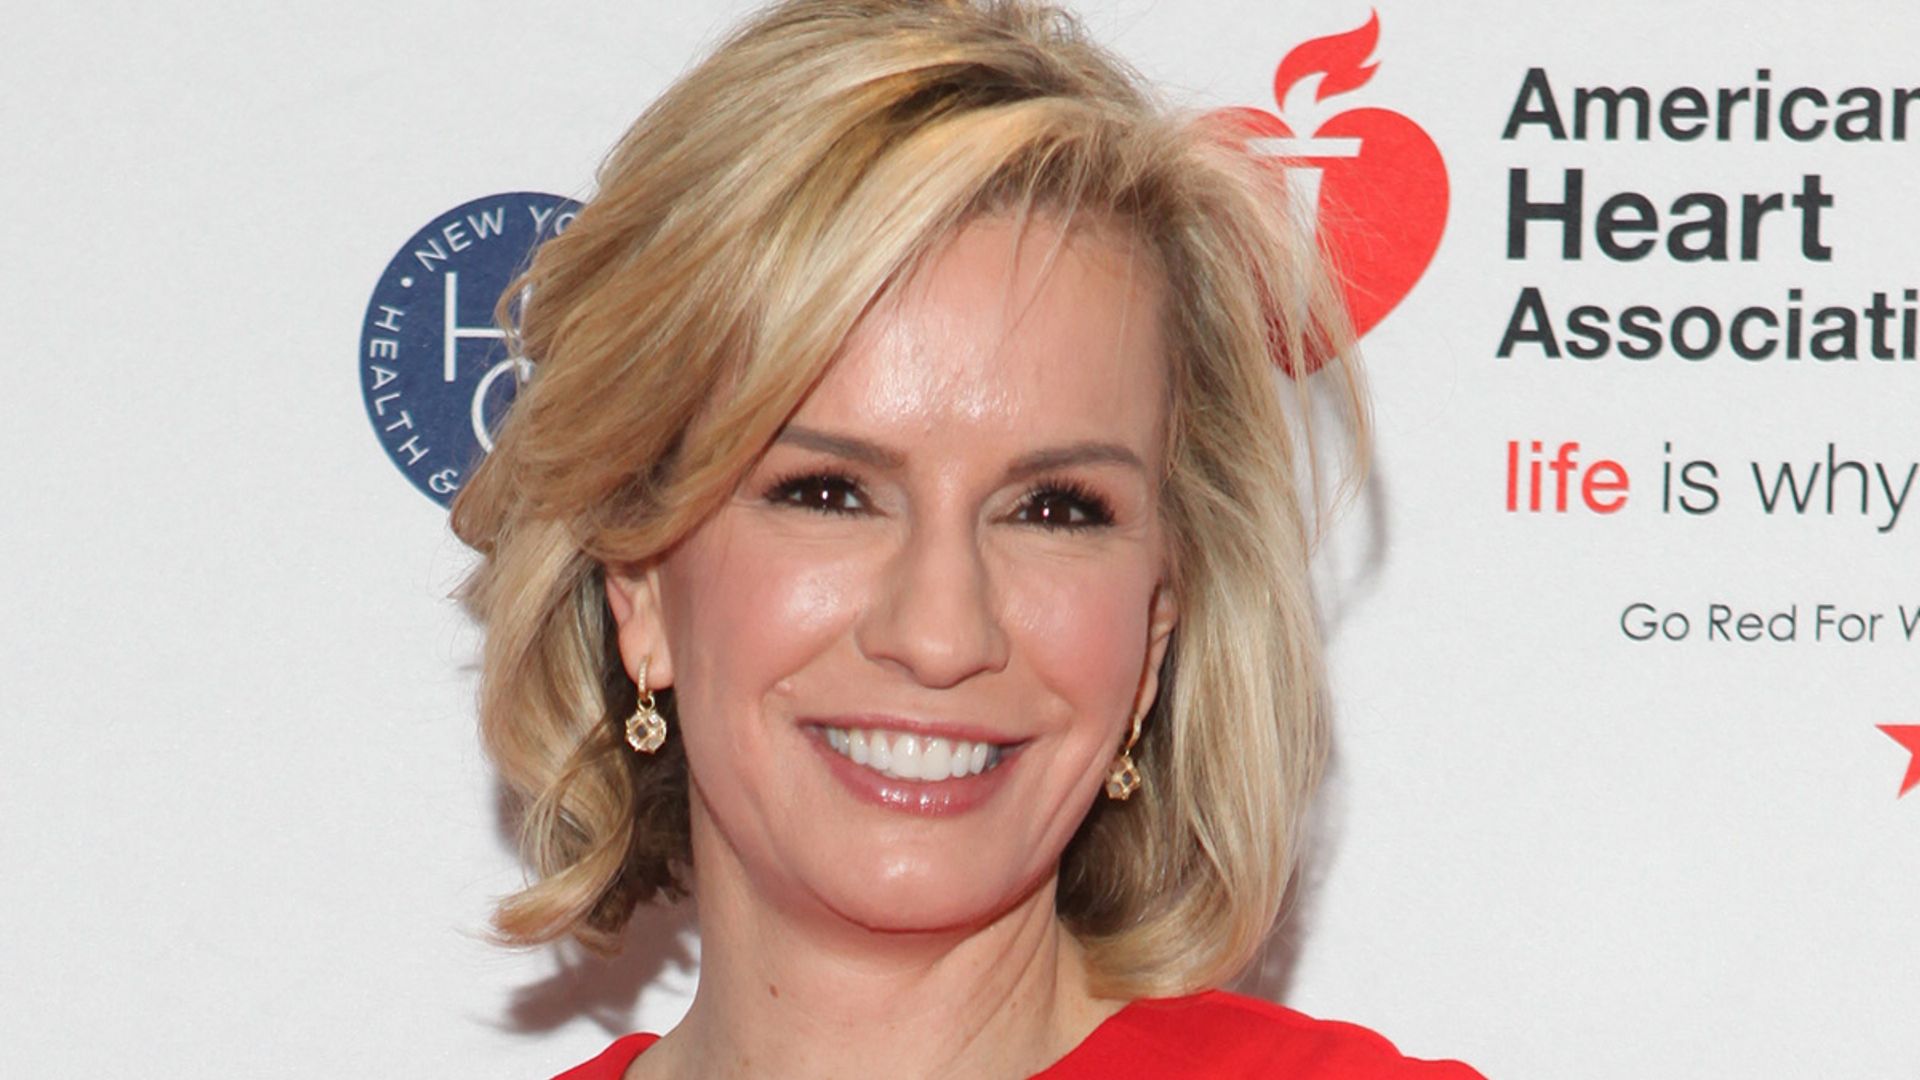 GMA's Dr. Jennifer Ashton has a busy week of work ahead of her